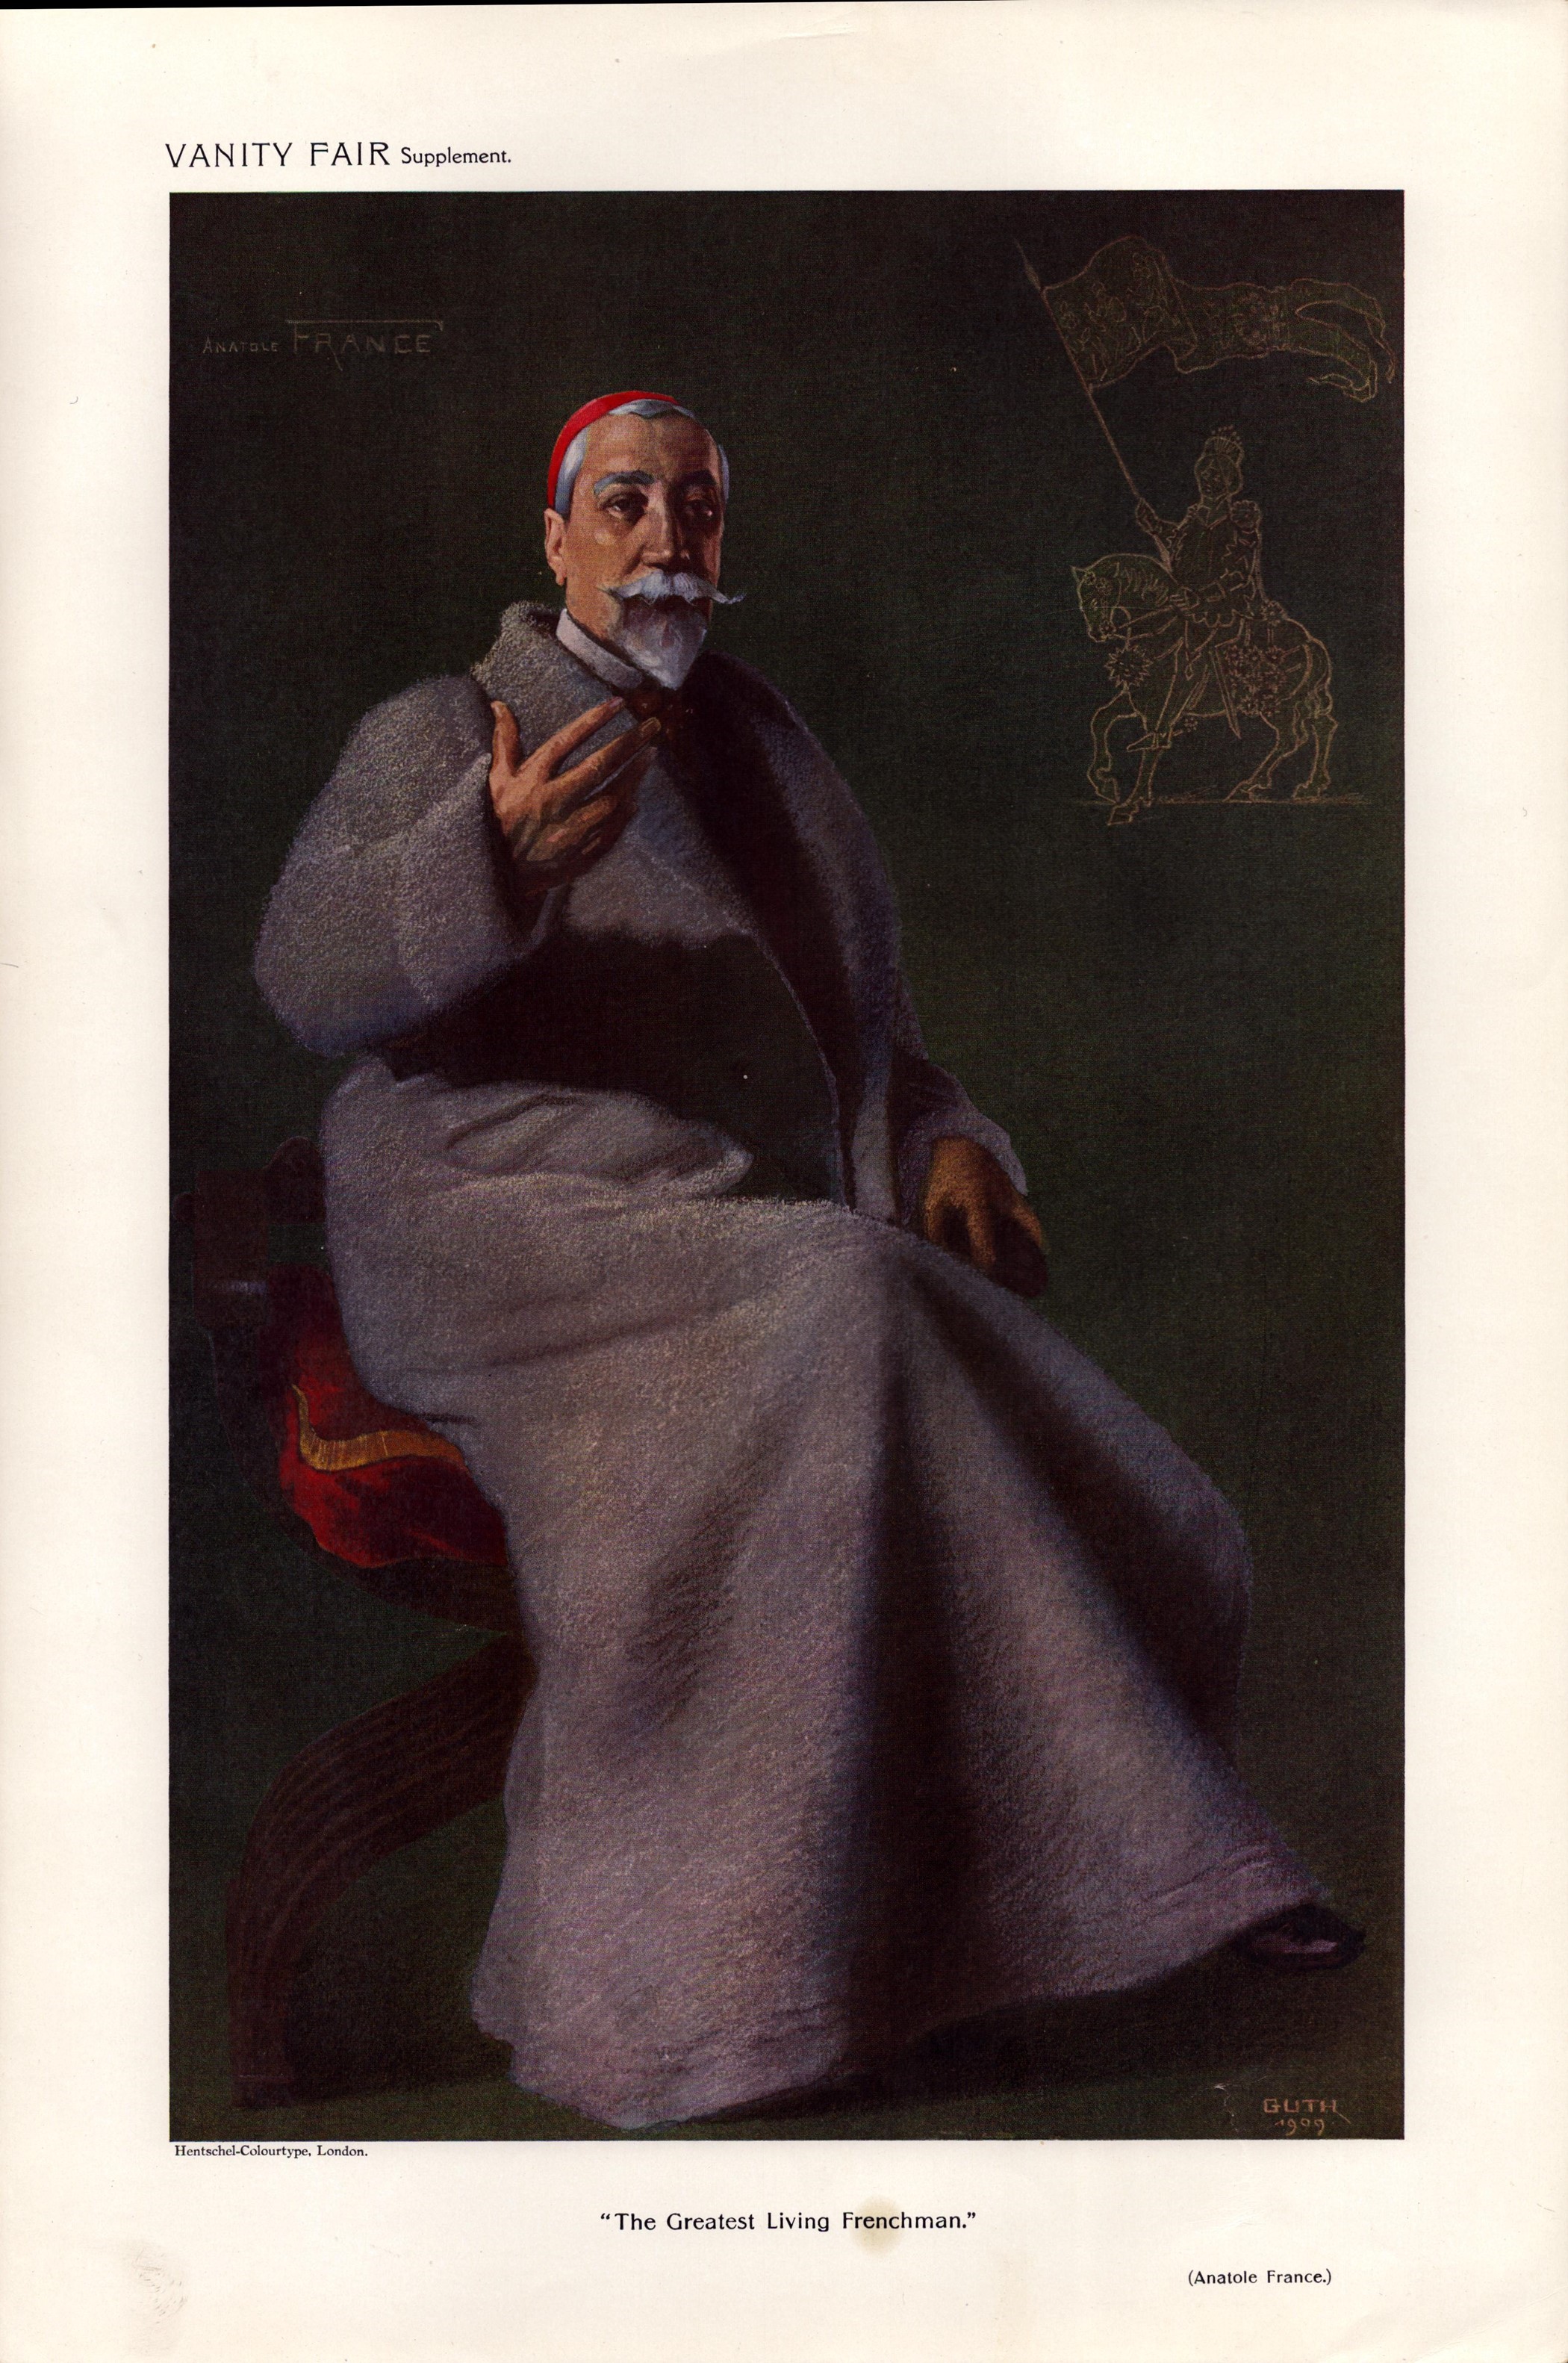 Vanity fair print. Titled The Greatest living Frenchman. Approx size 14x12inch. Good condition Est.